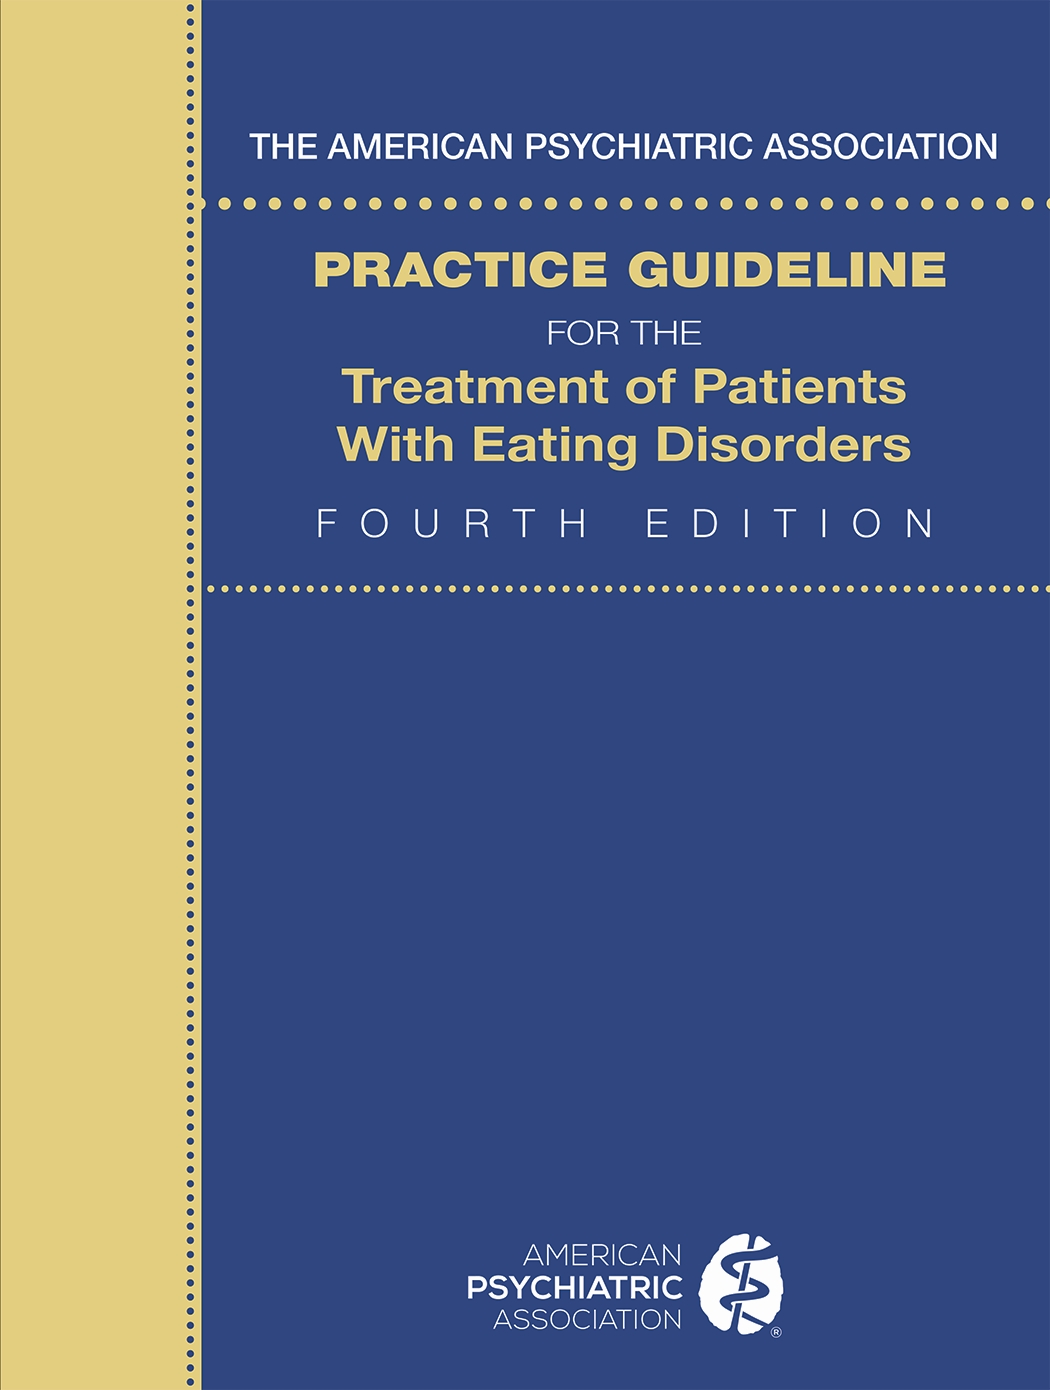 View Table of Contents for The American Psychiatric Association Practice Guideline for the Treatment of                 Patients With Eating Disorders